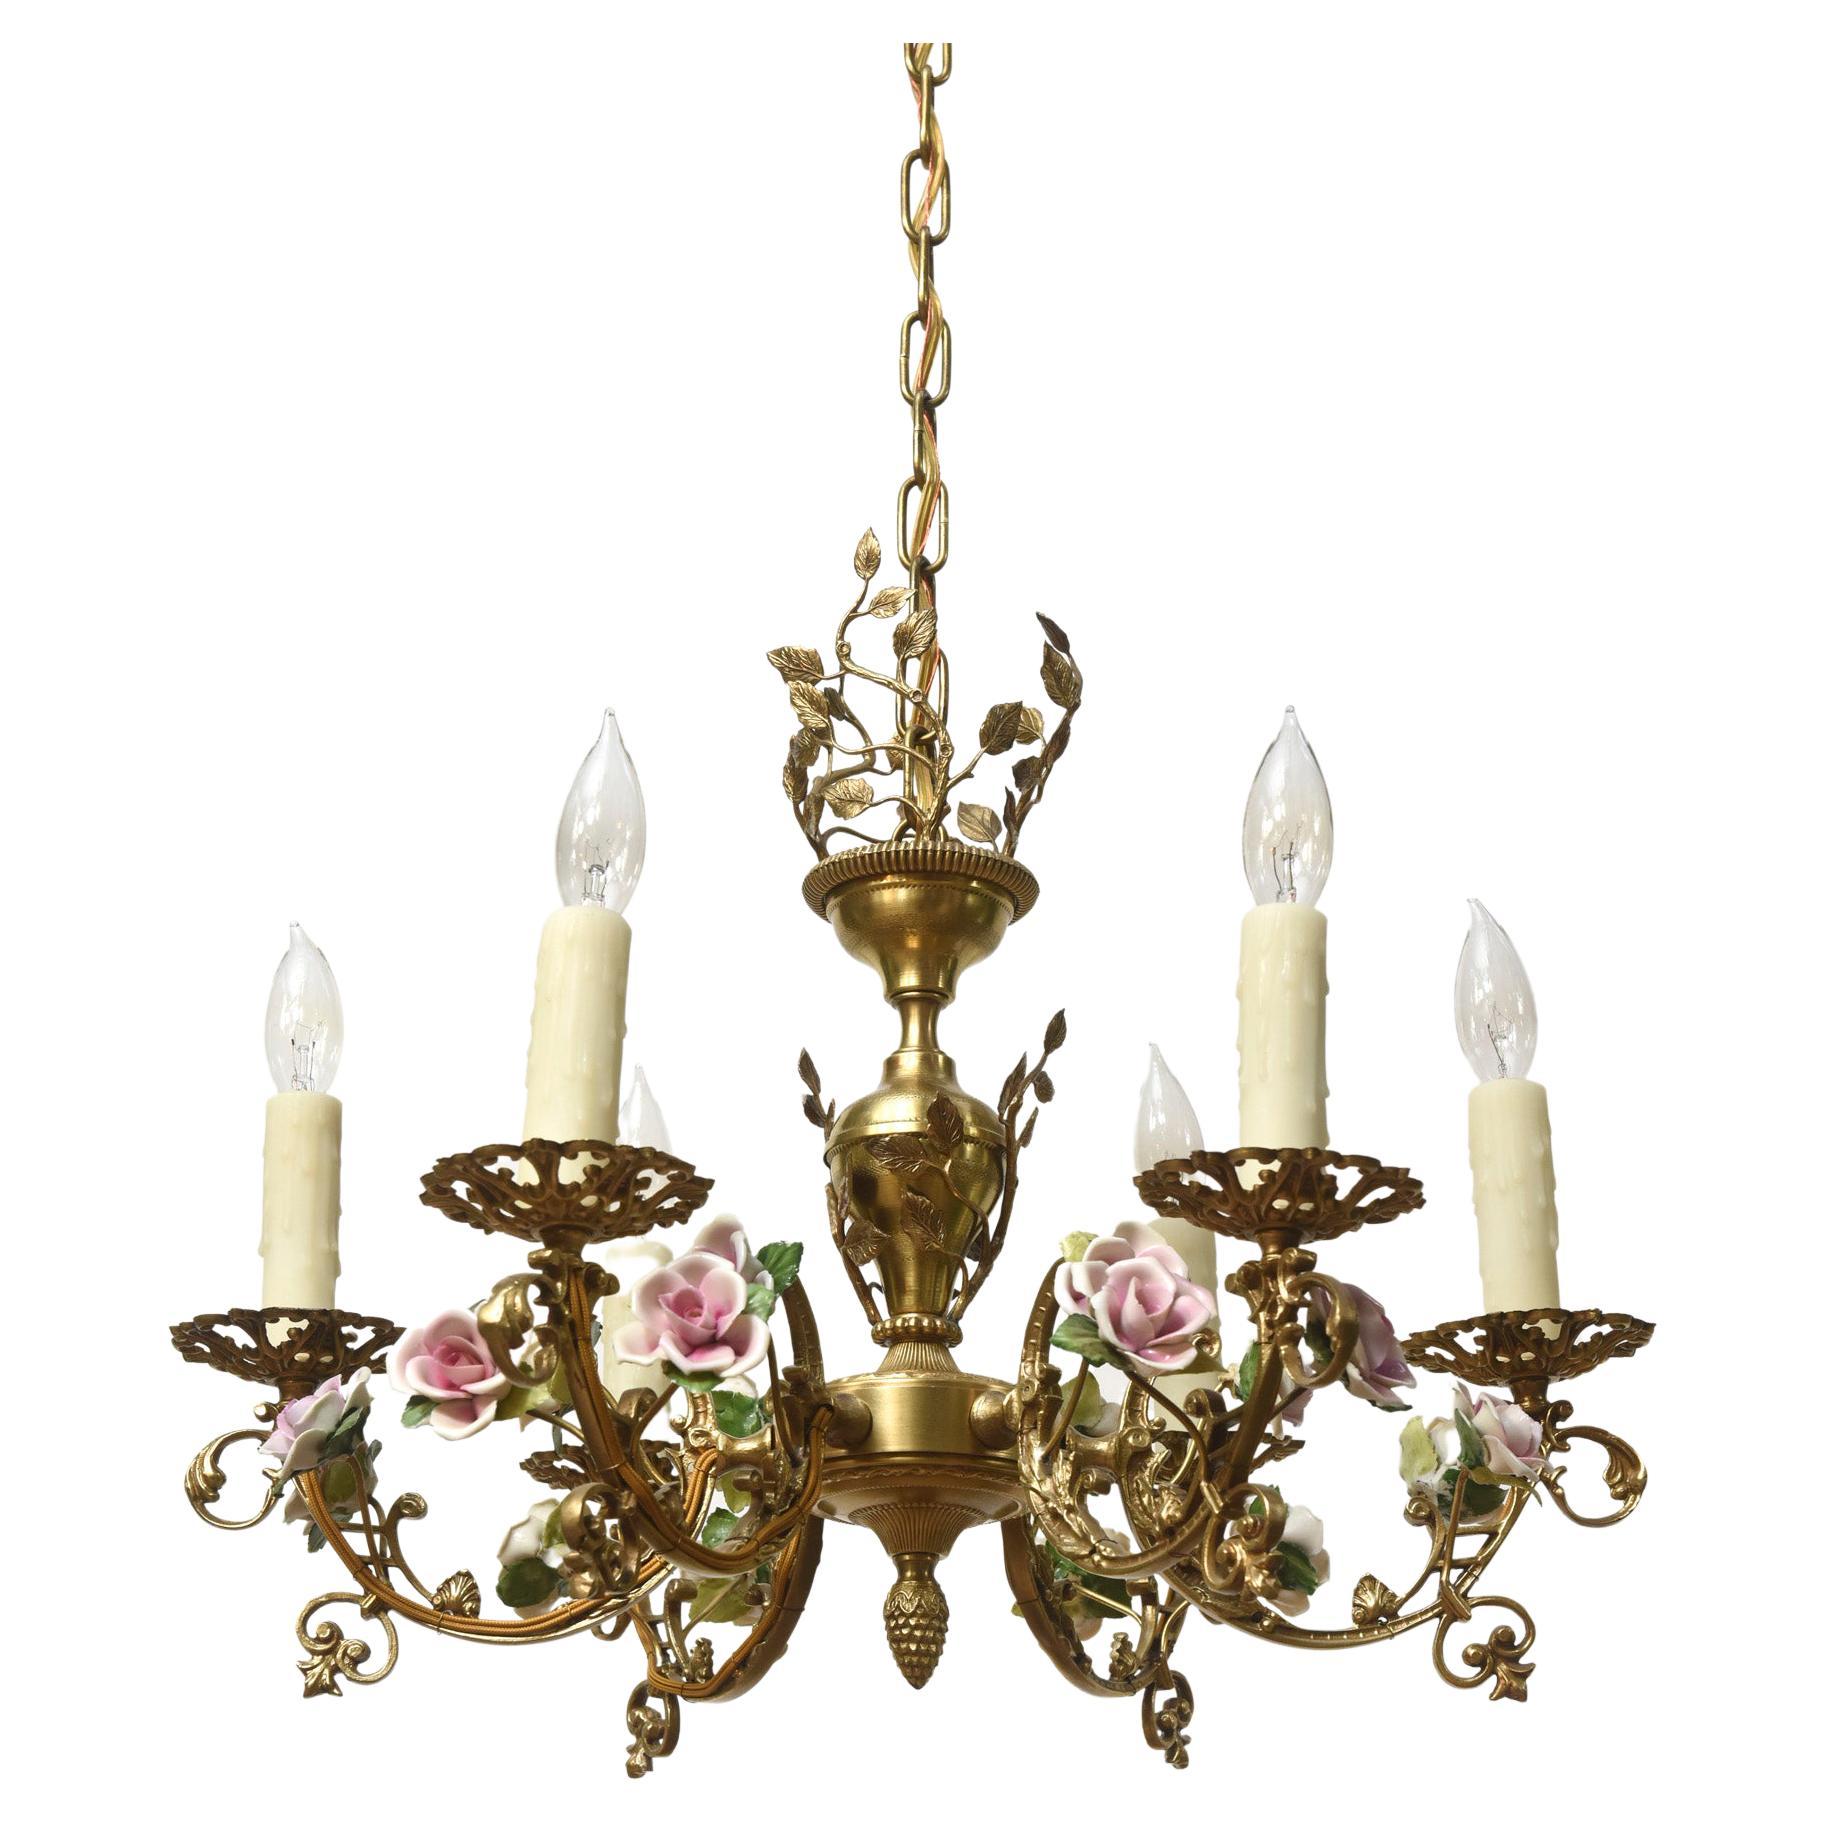 Six light French Chandelier with Porcelain Roses For Sale